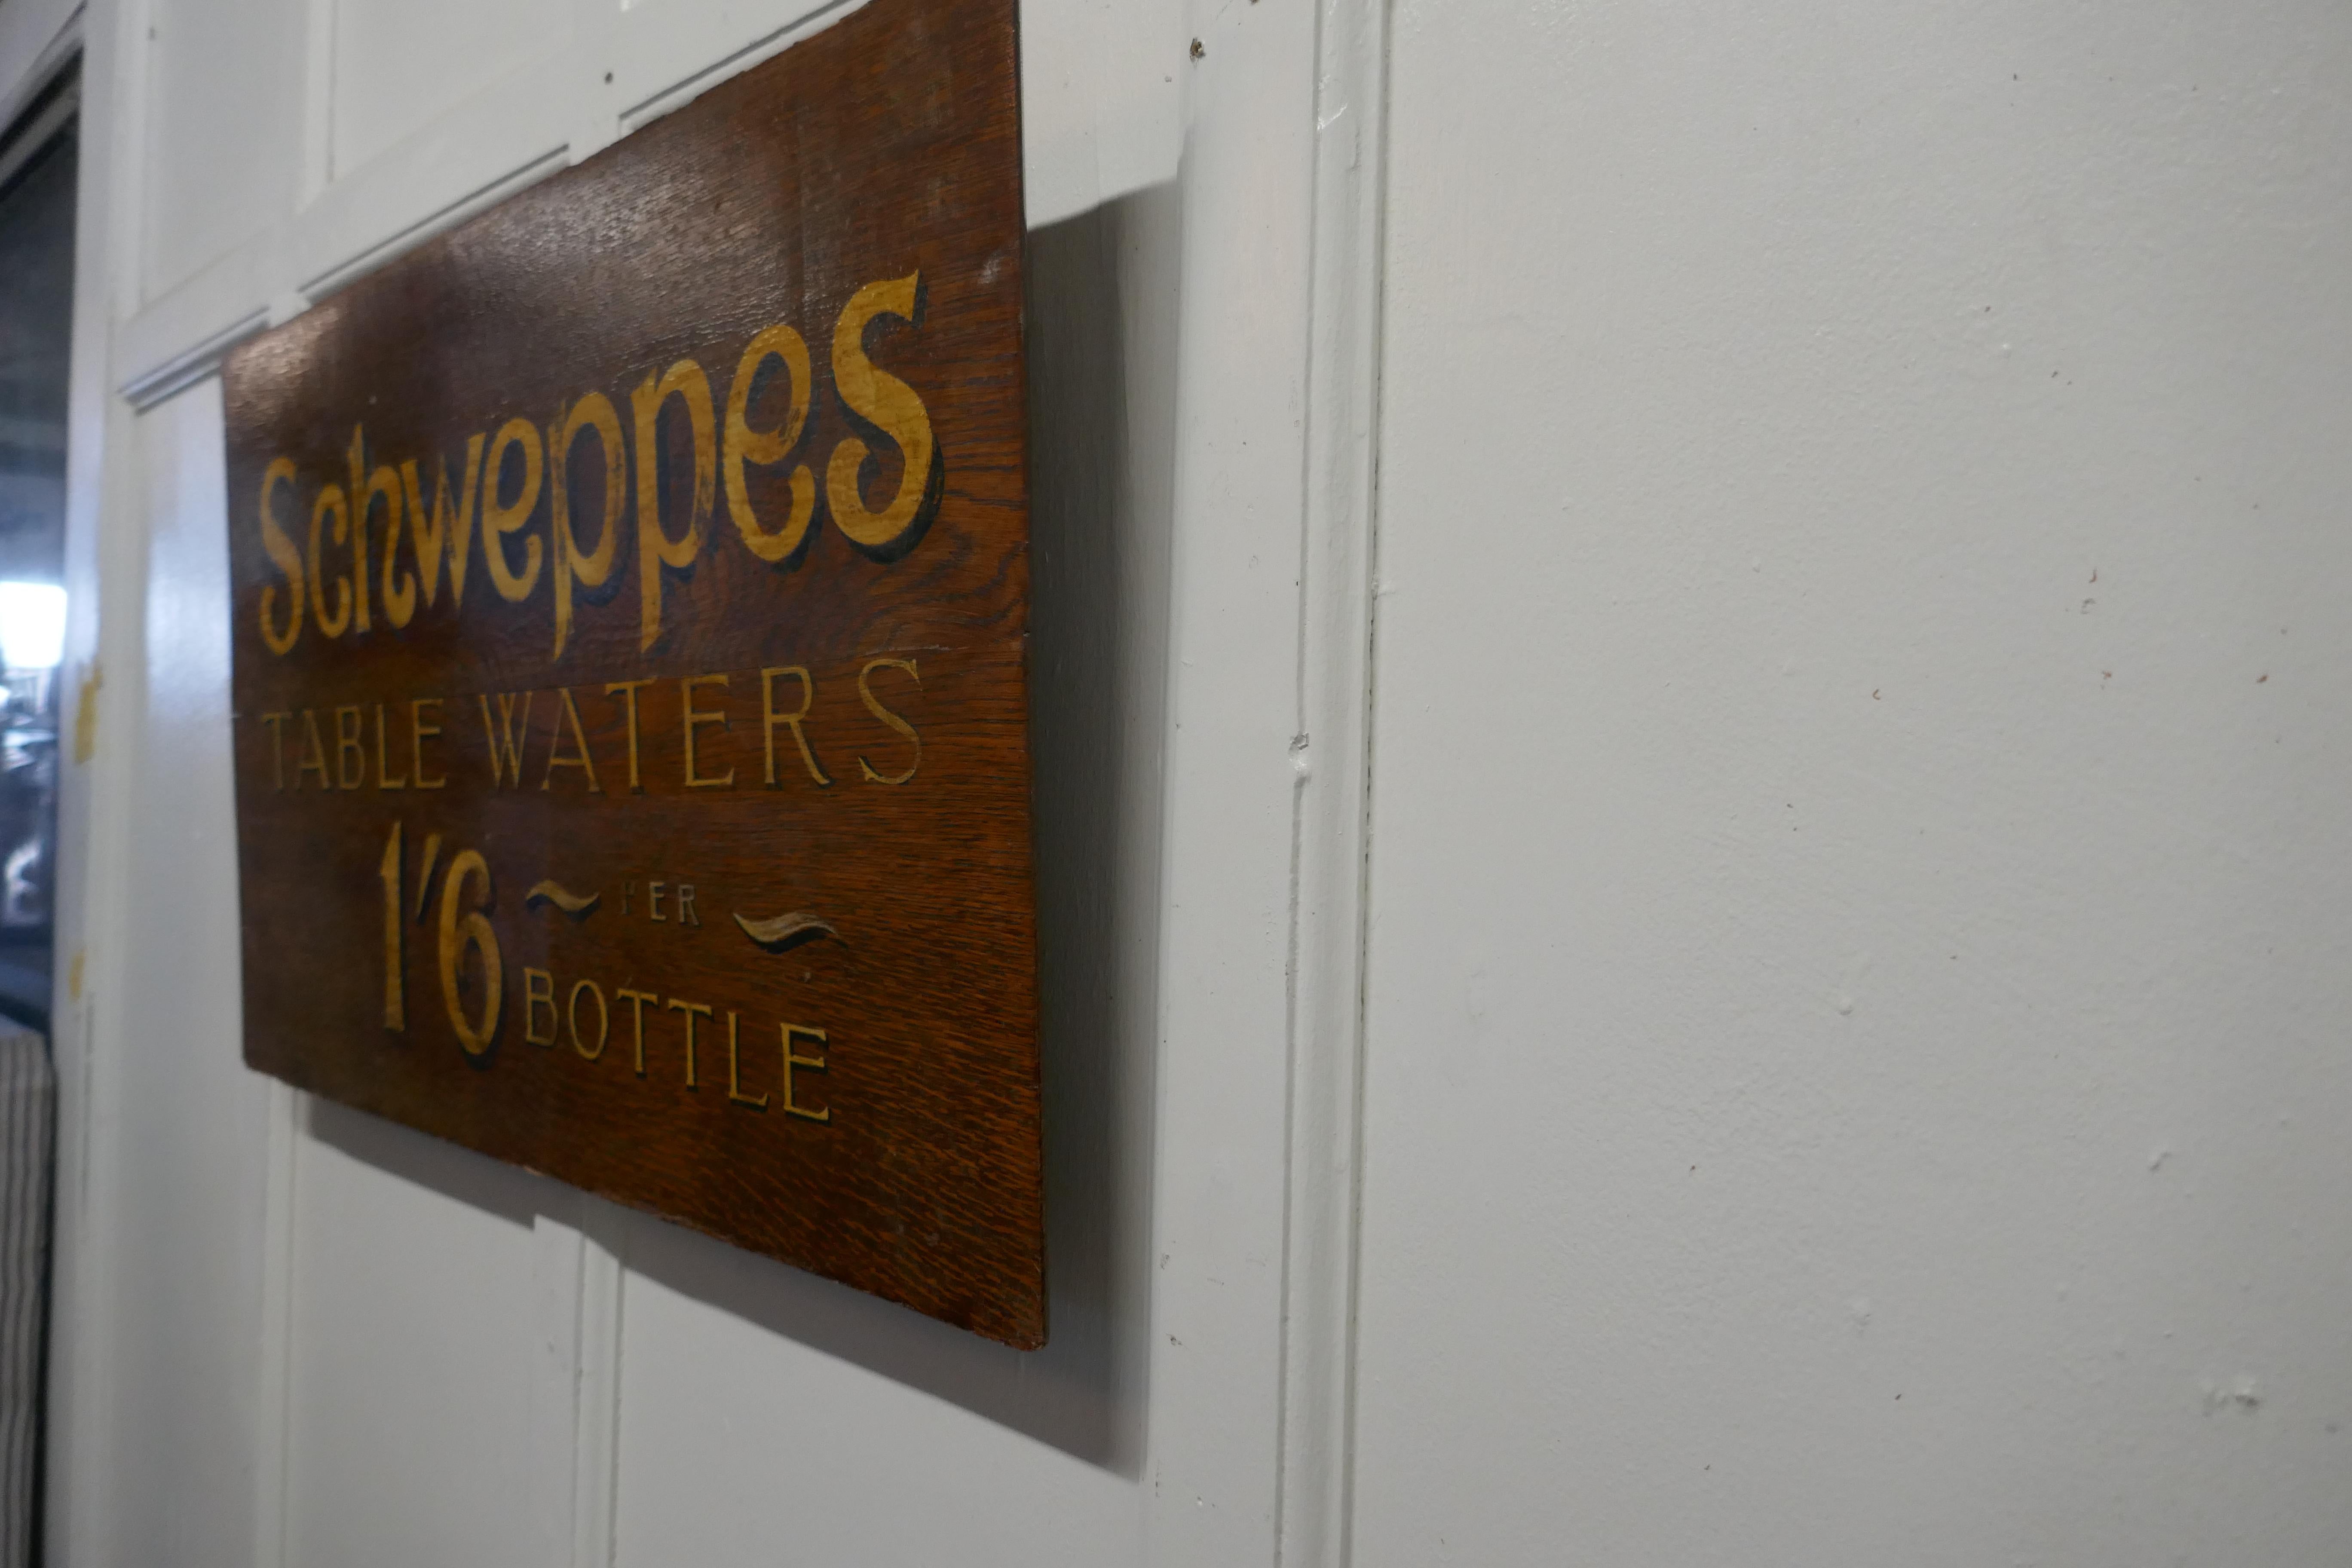 Schweppes Table Waters Oak Trade Sign Board In Good Condition For Sale In Chillerton, Isle of Wight